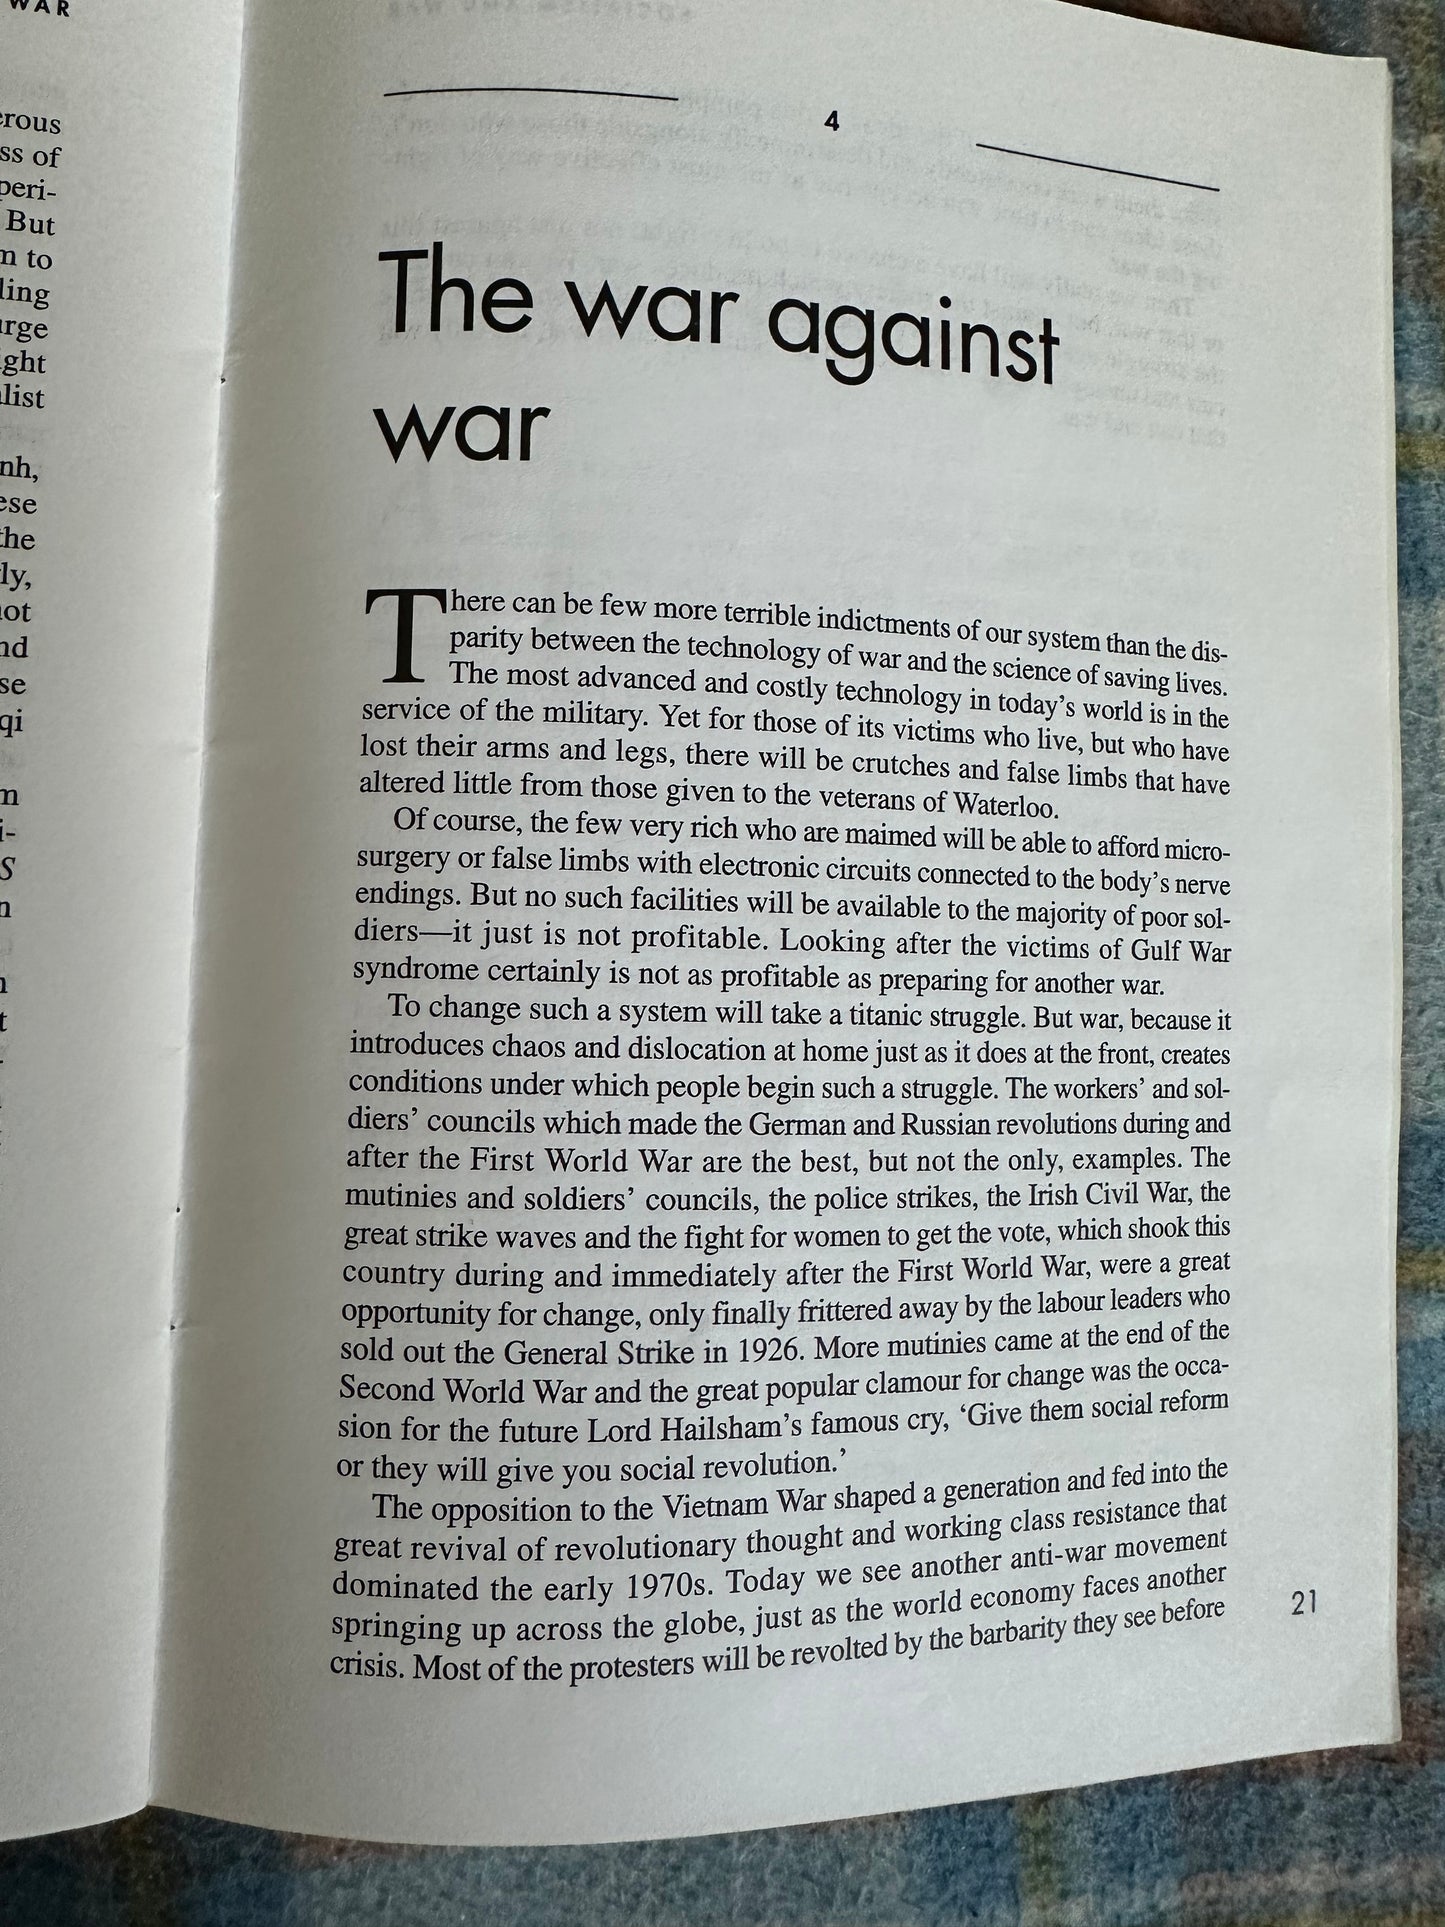 1998 Socialism & War - John Rees(Socialist Workers Party Published)